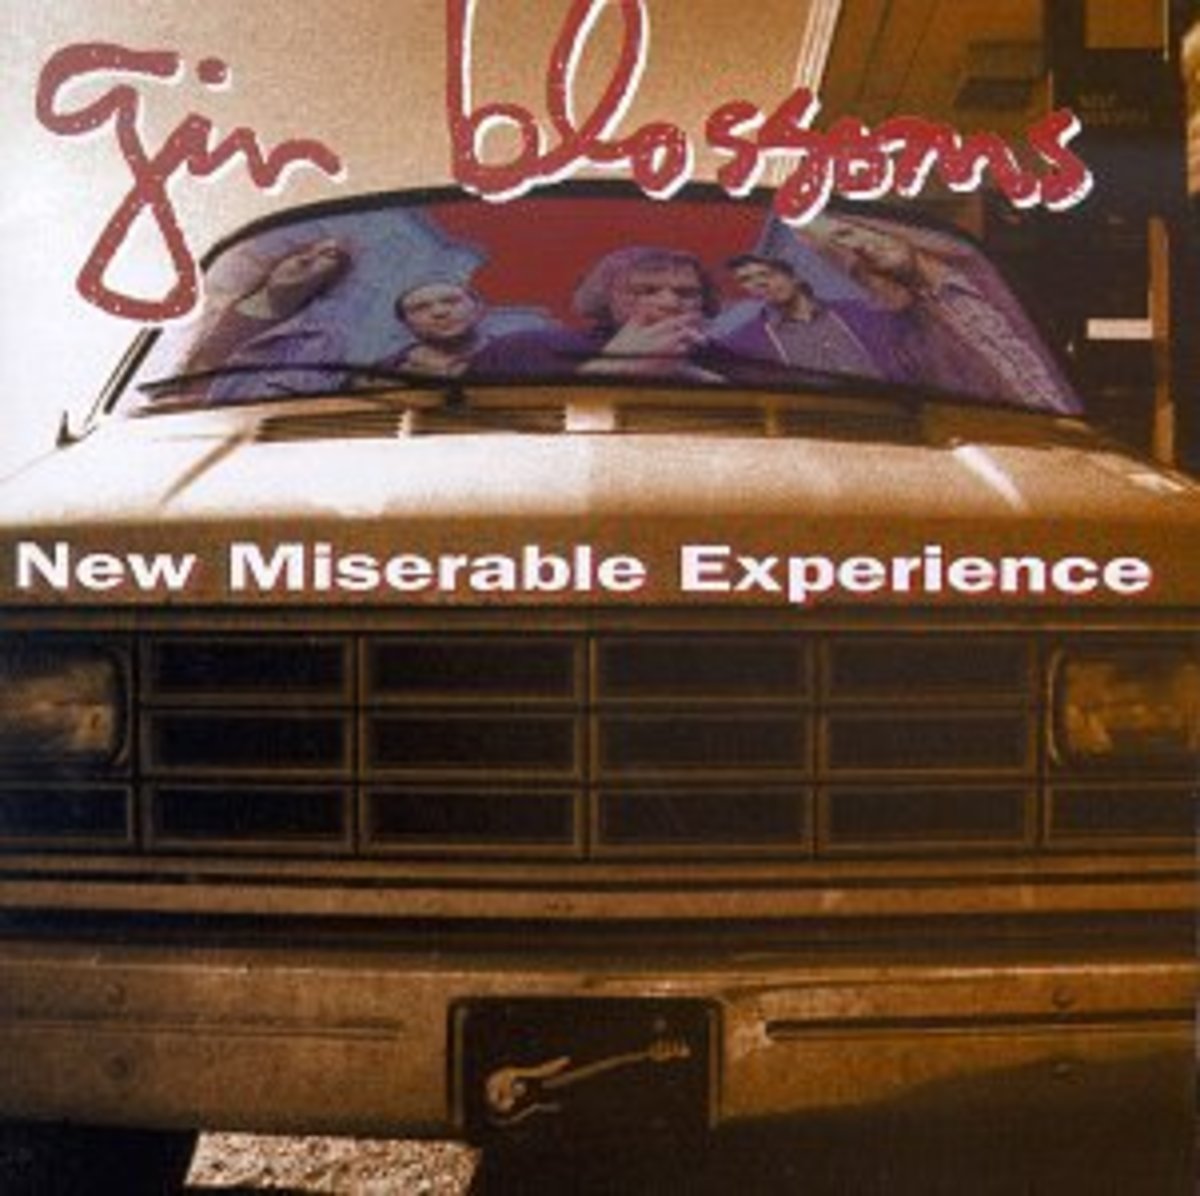 "New MIserable Experience" by the Gin Blossoms